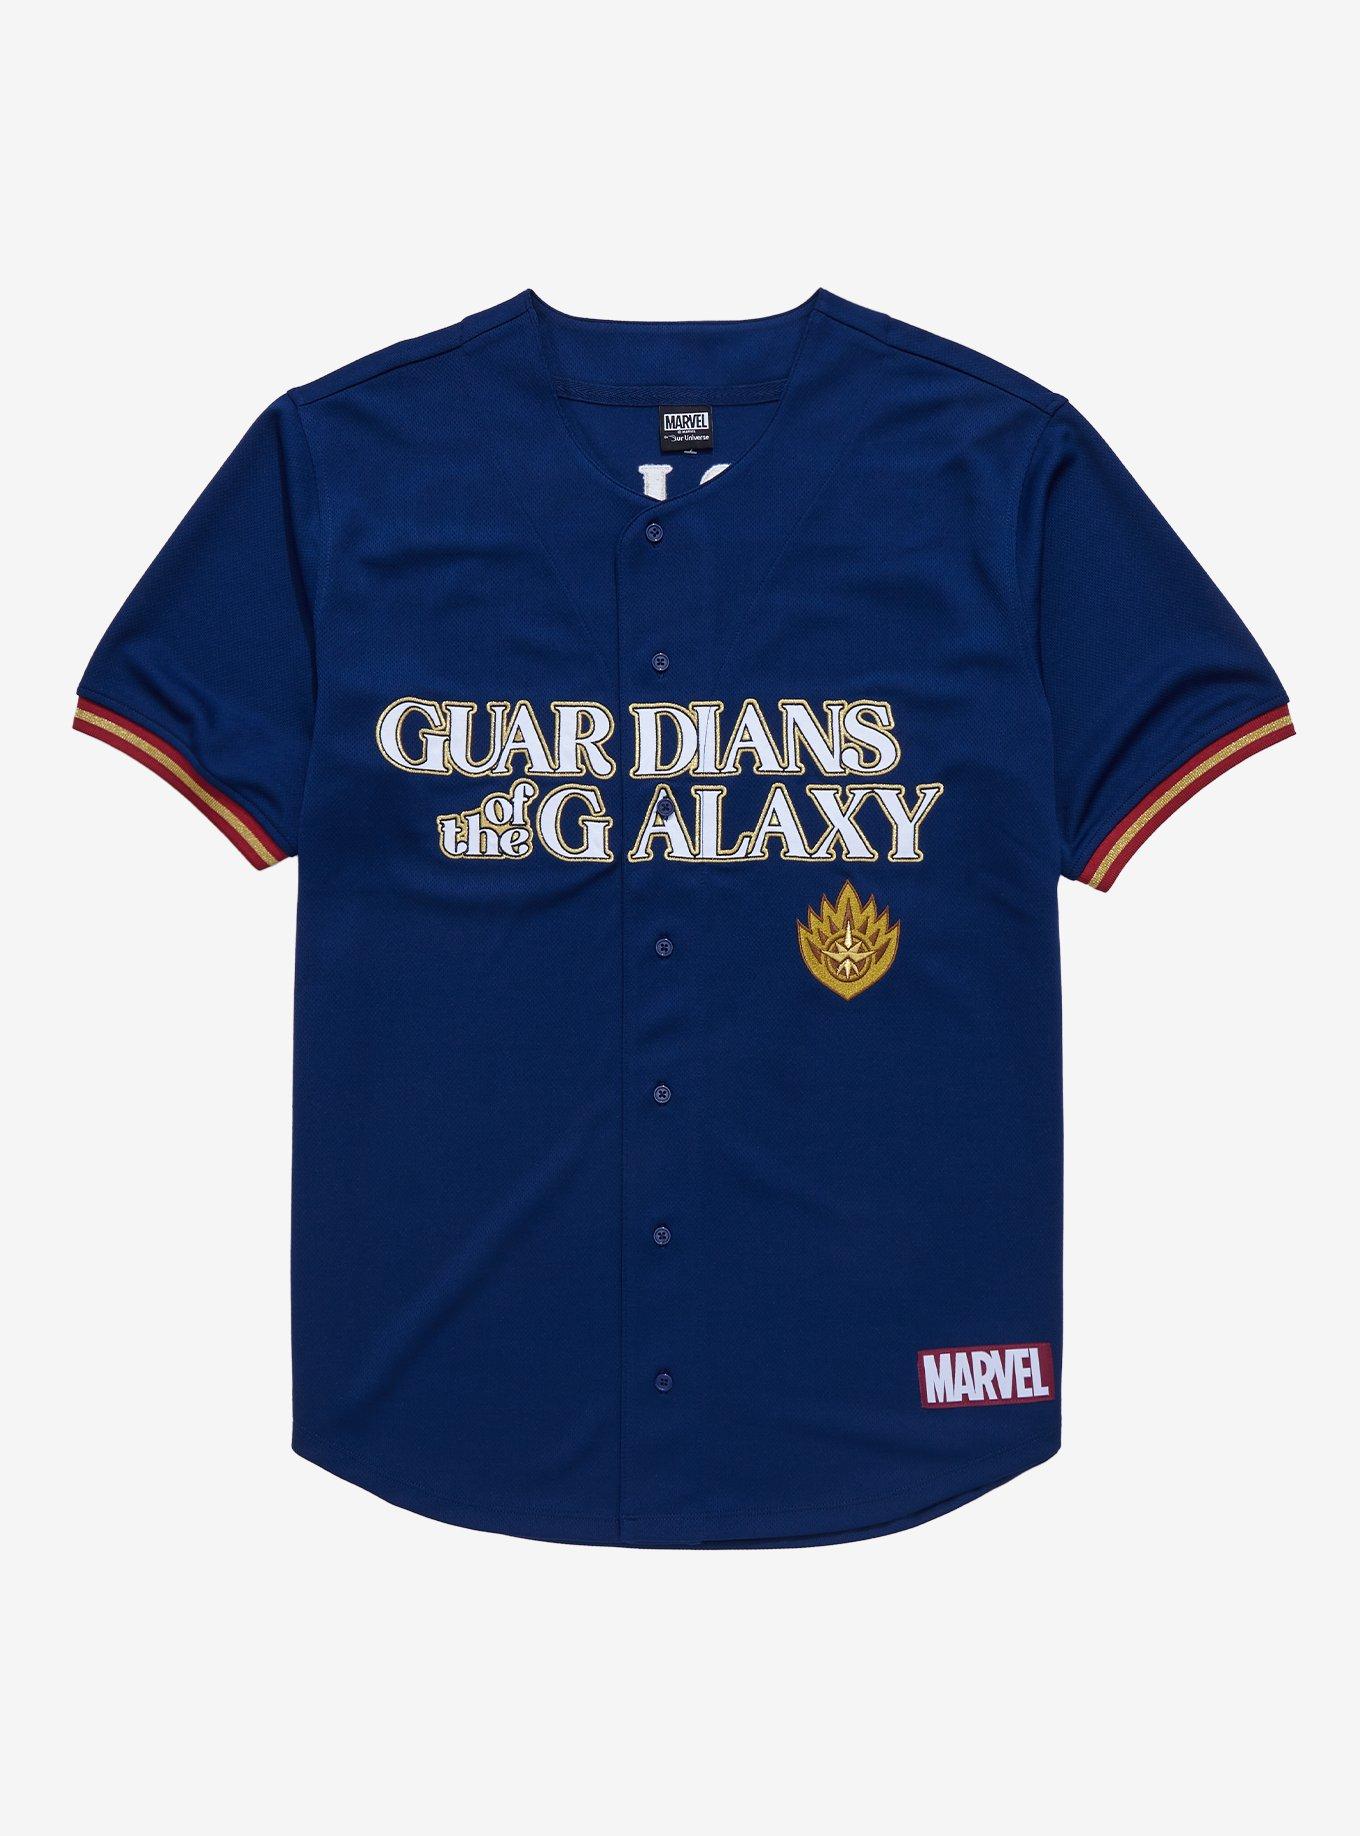 Marvel Guardians of the Galaxy Star-Lord Baseball Jersey